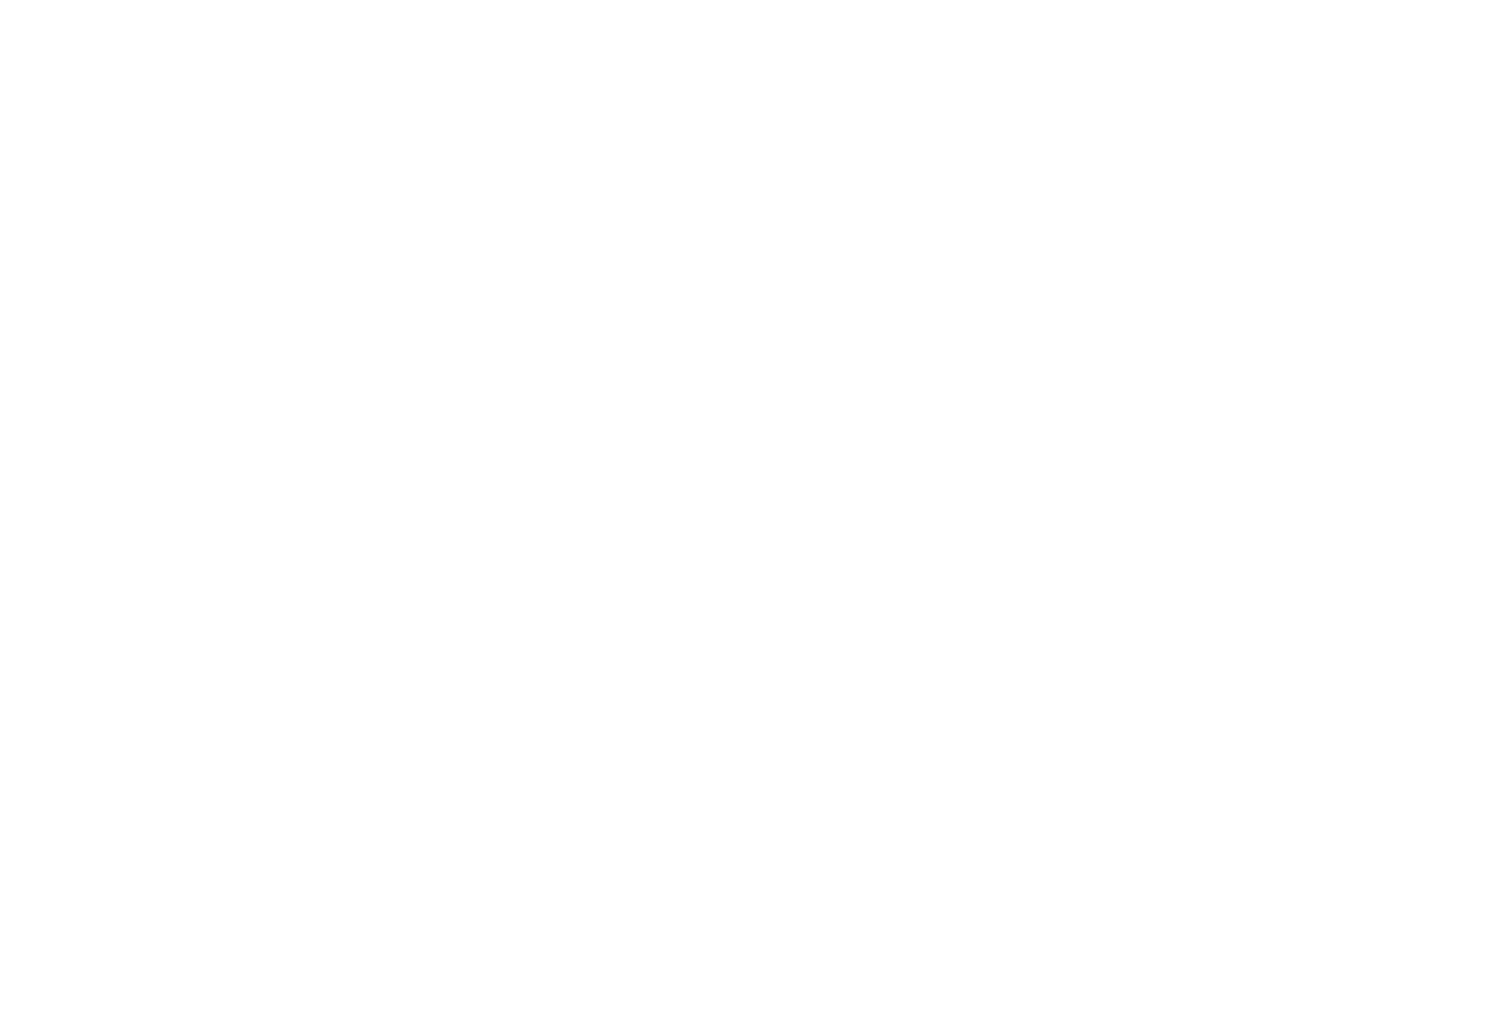 The Shoptaw Group